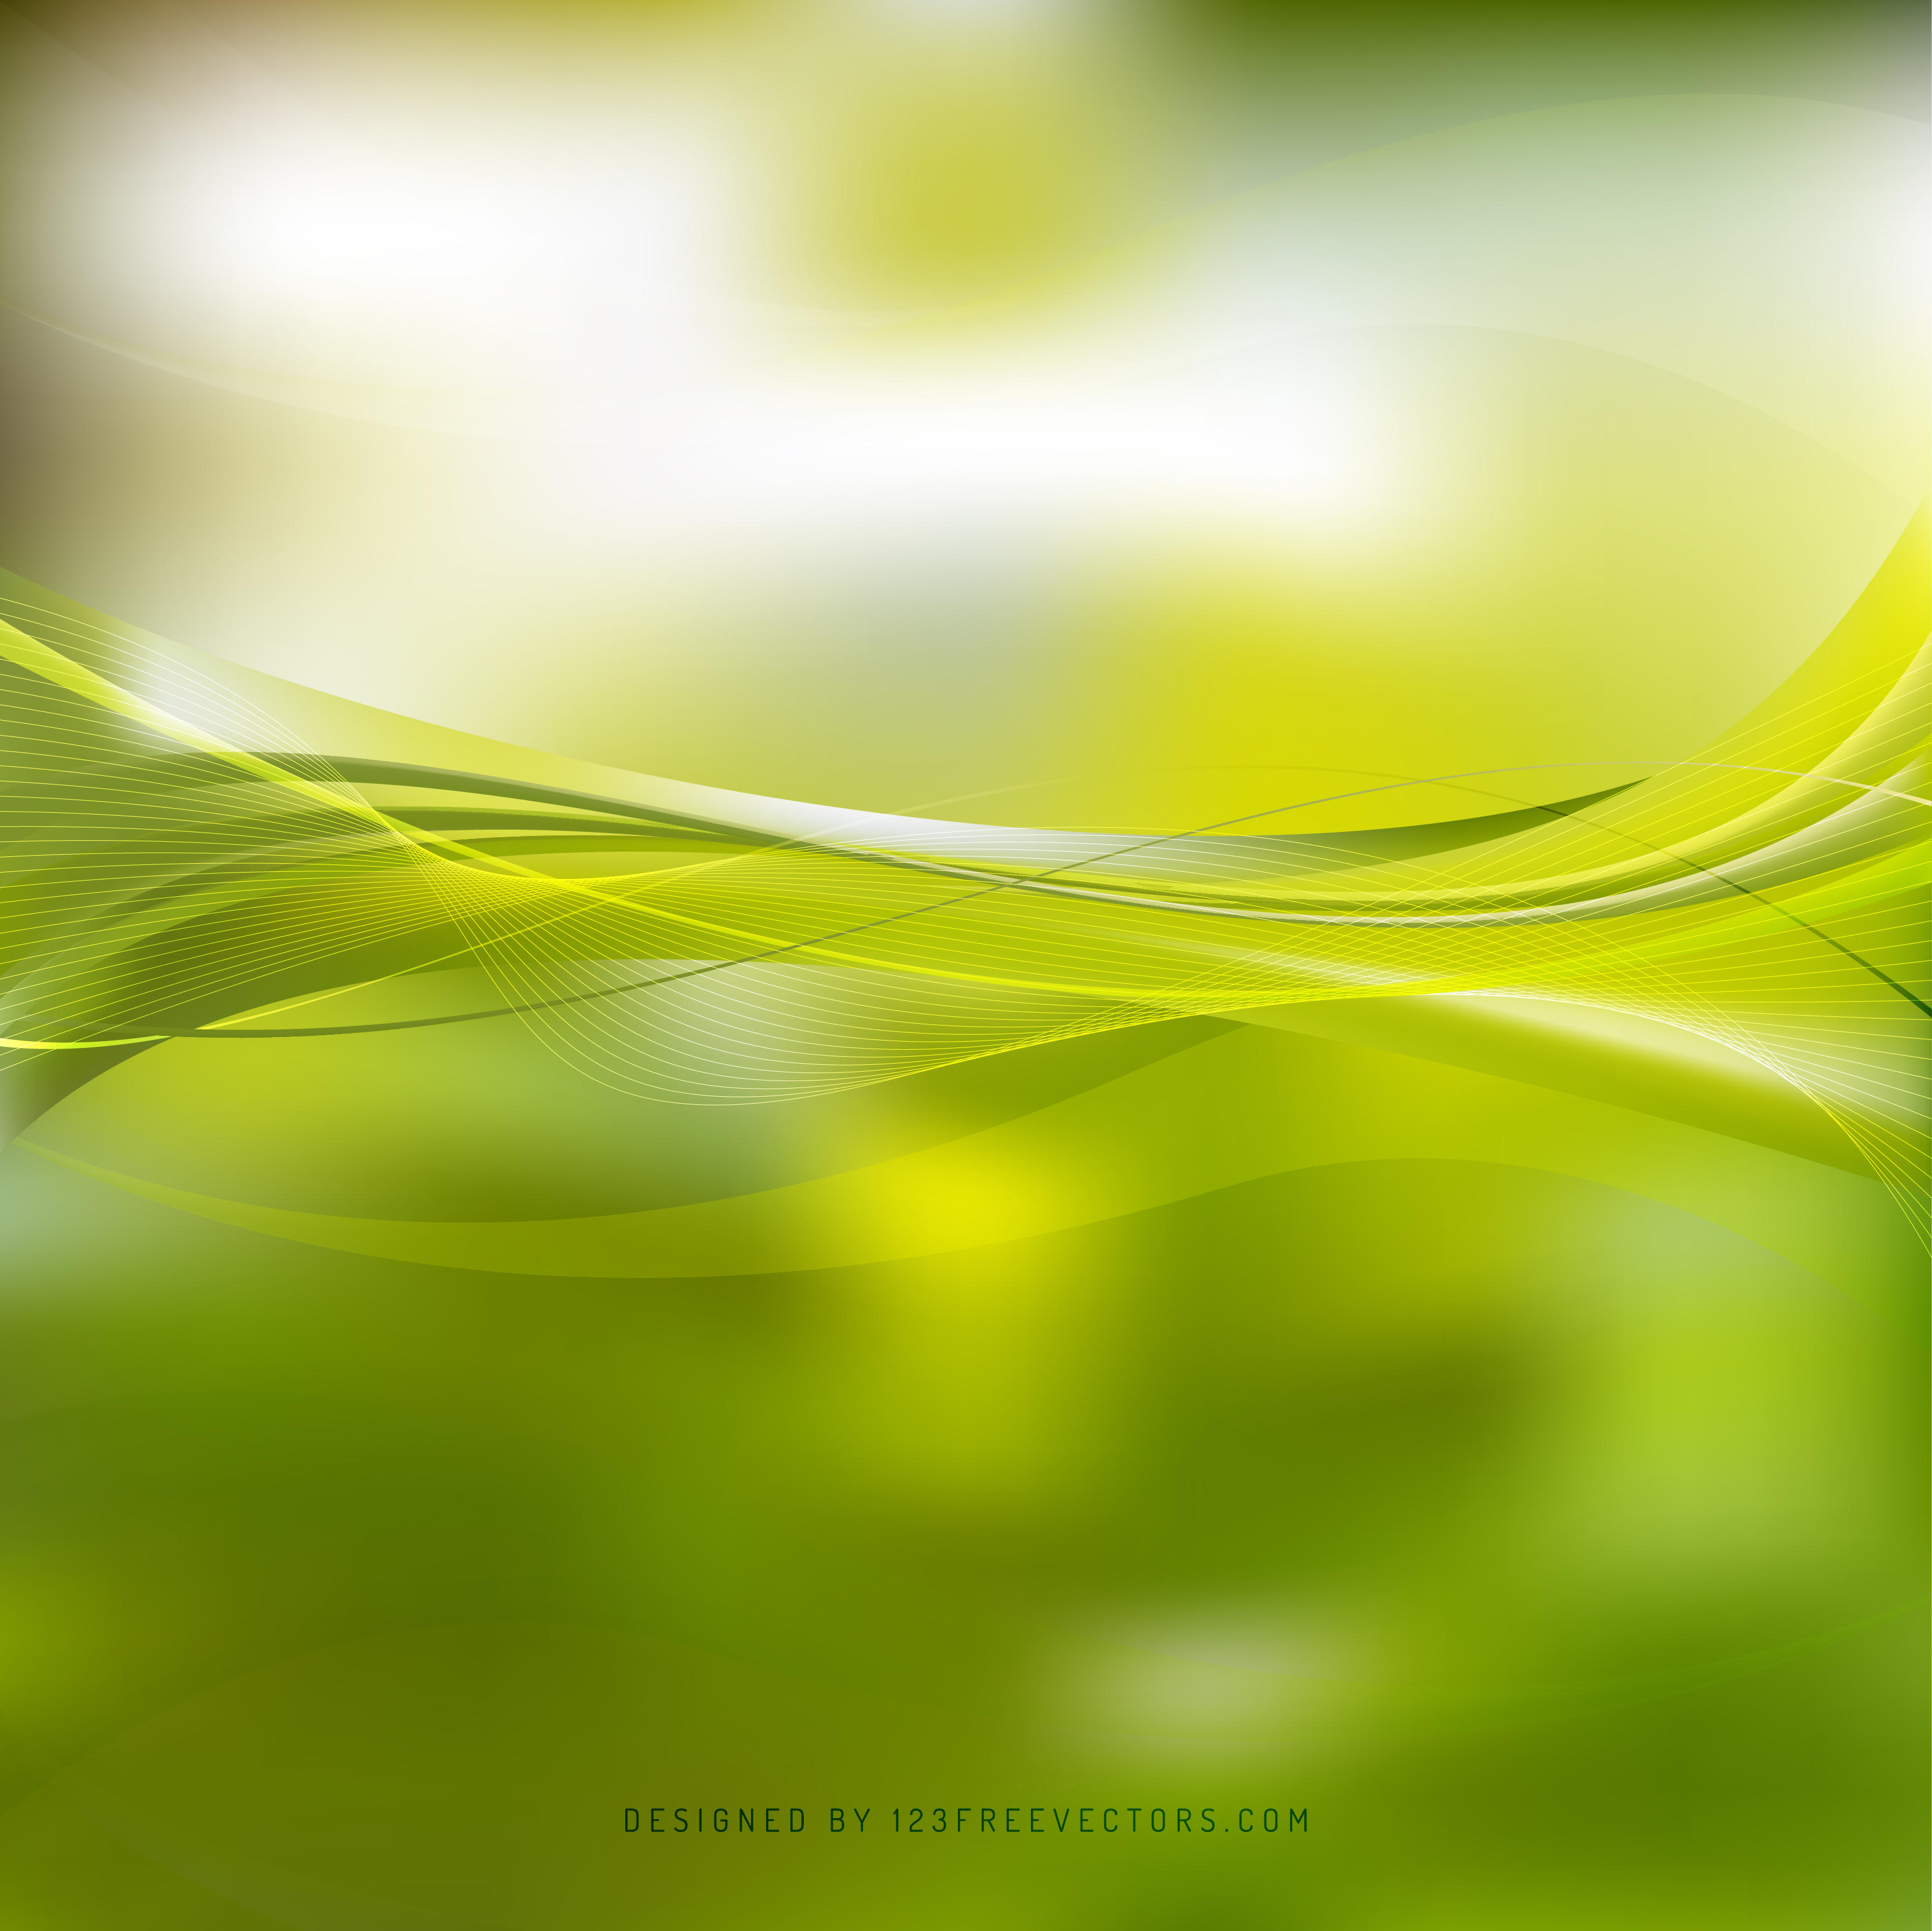 Yellow Green Curved Lines Background Template | 123Freevectors